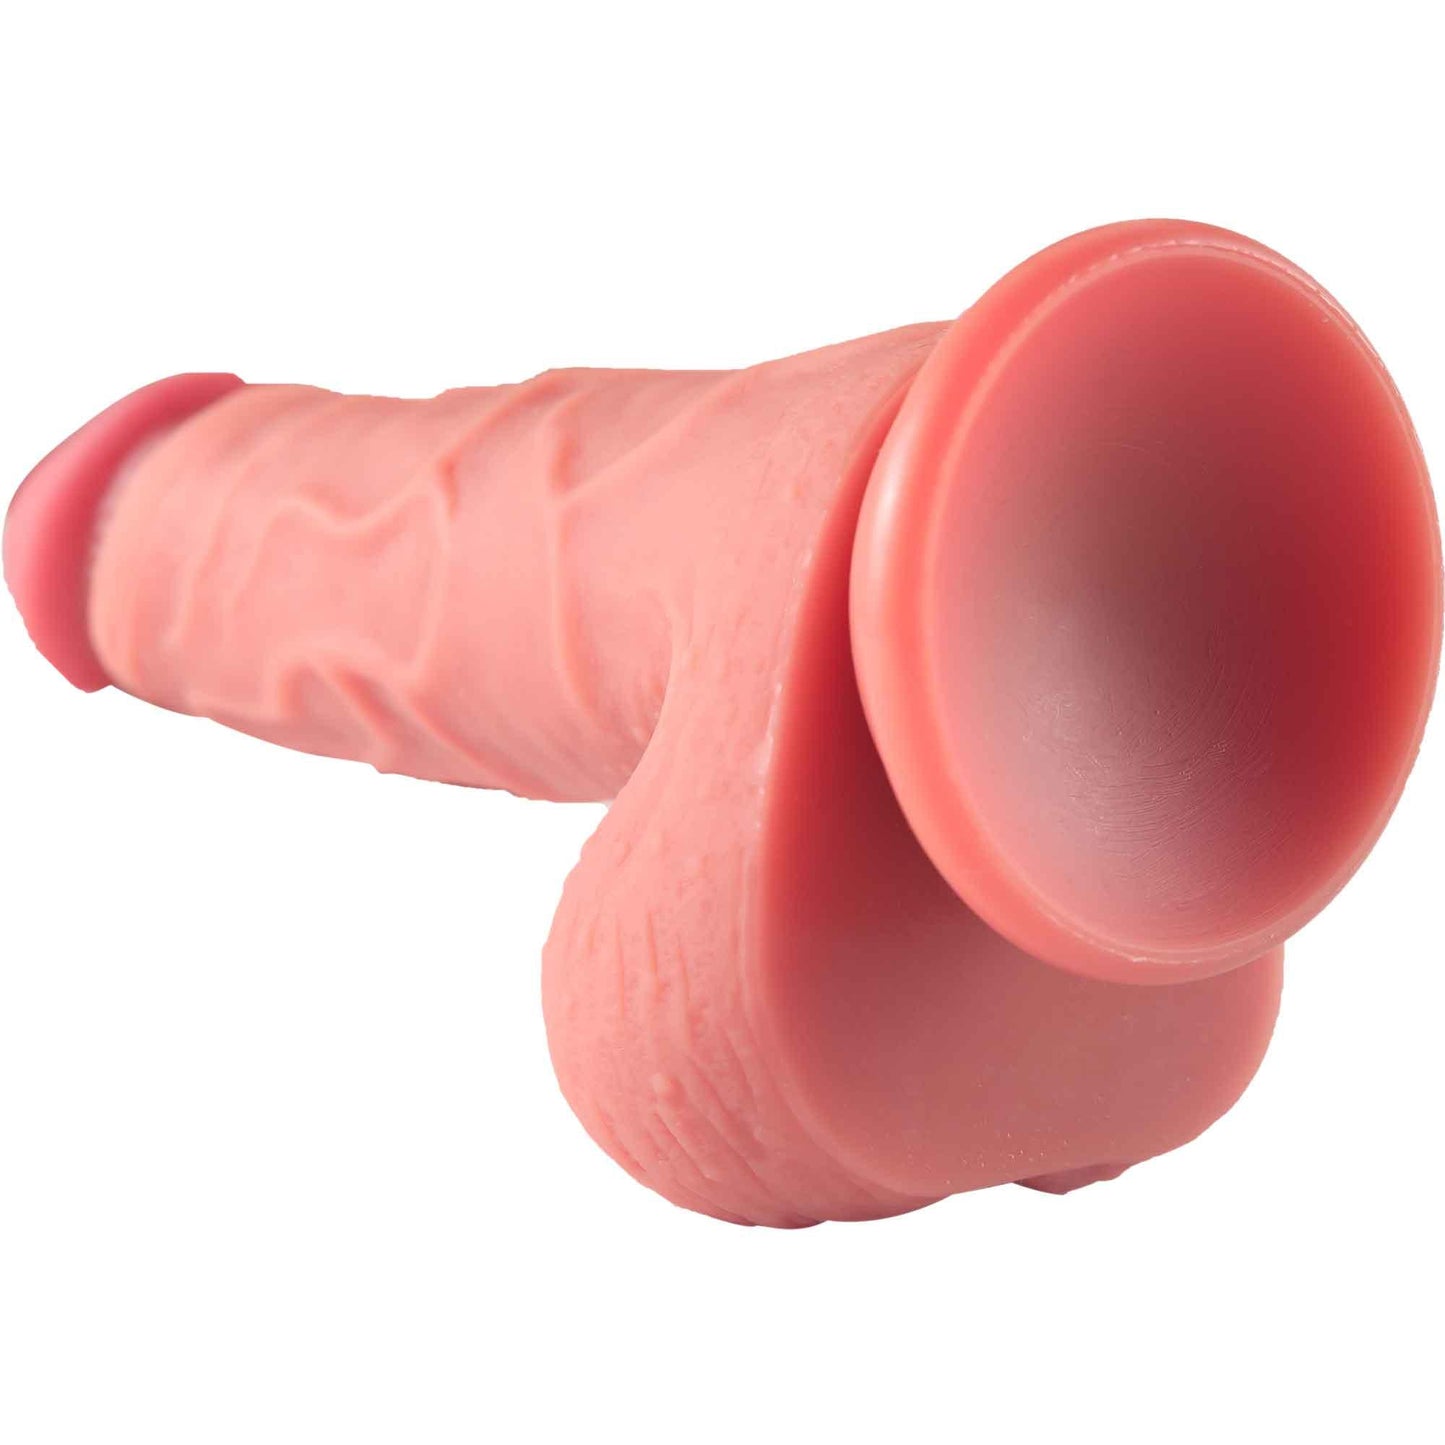 Hansen - Silicone Cyberskin Dildo Suction Cup 6 Inch